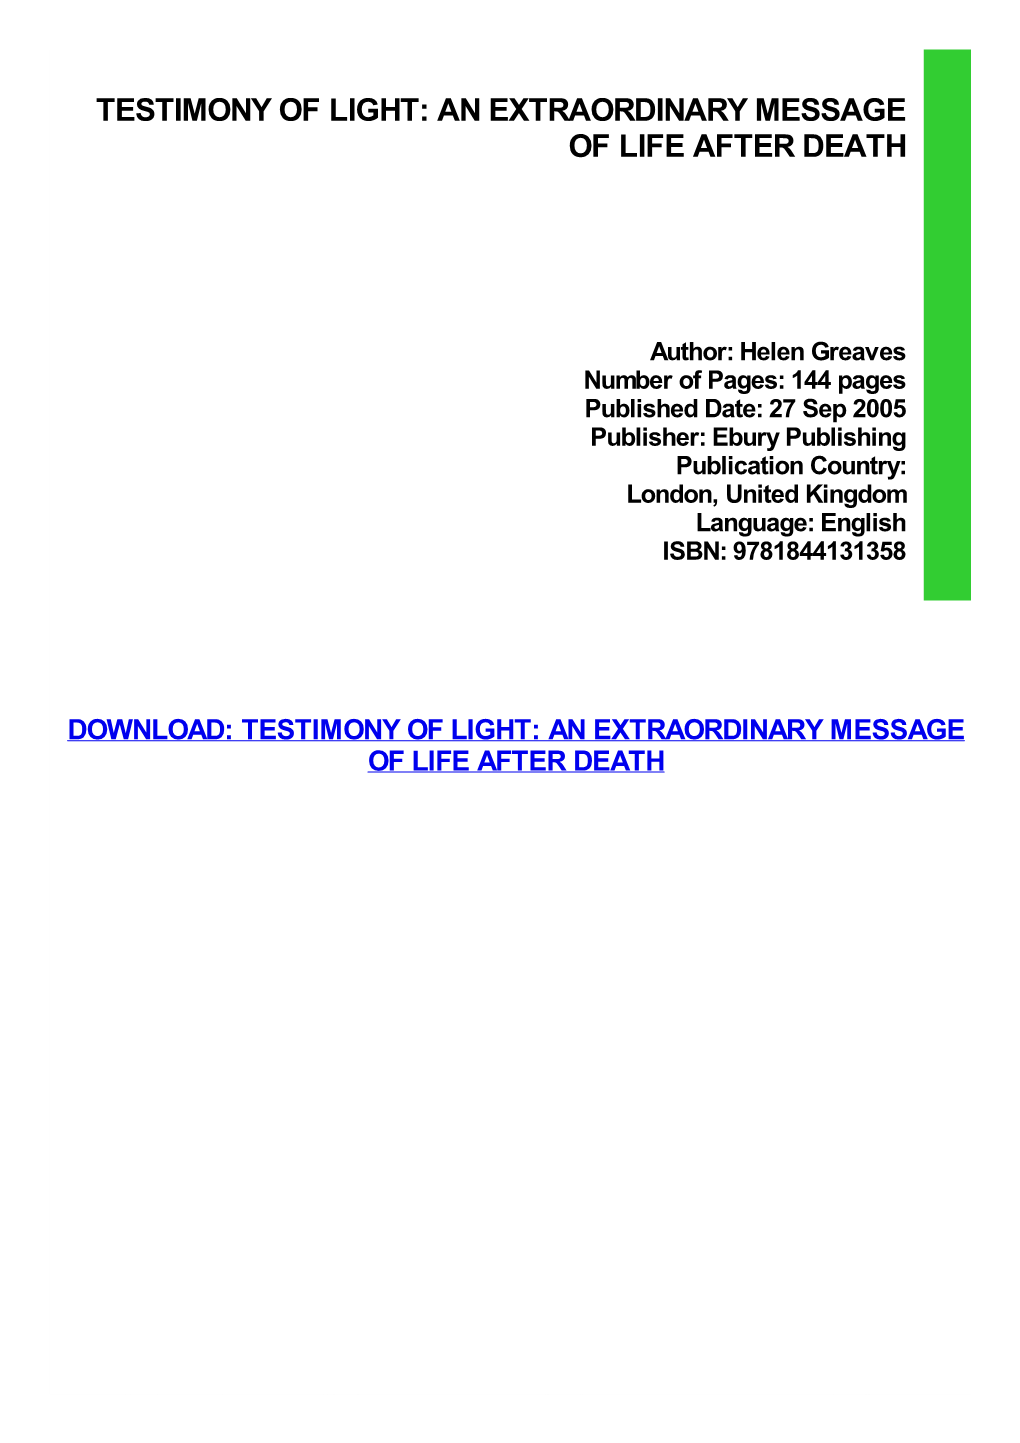 Testimony of Light: an Extraordinary Message of Life After Death